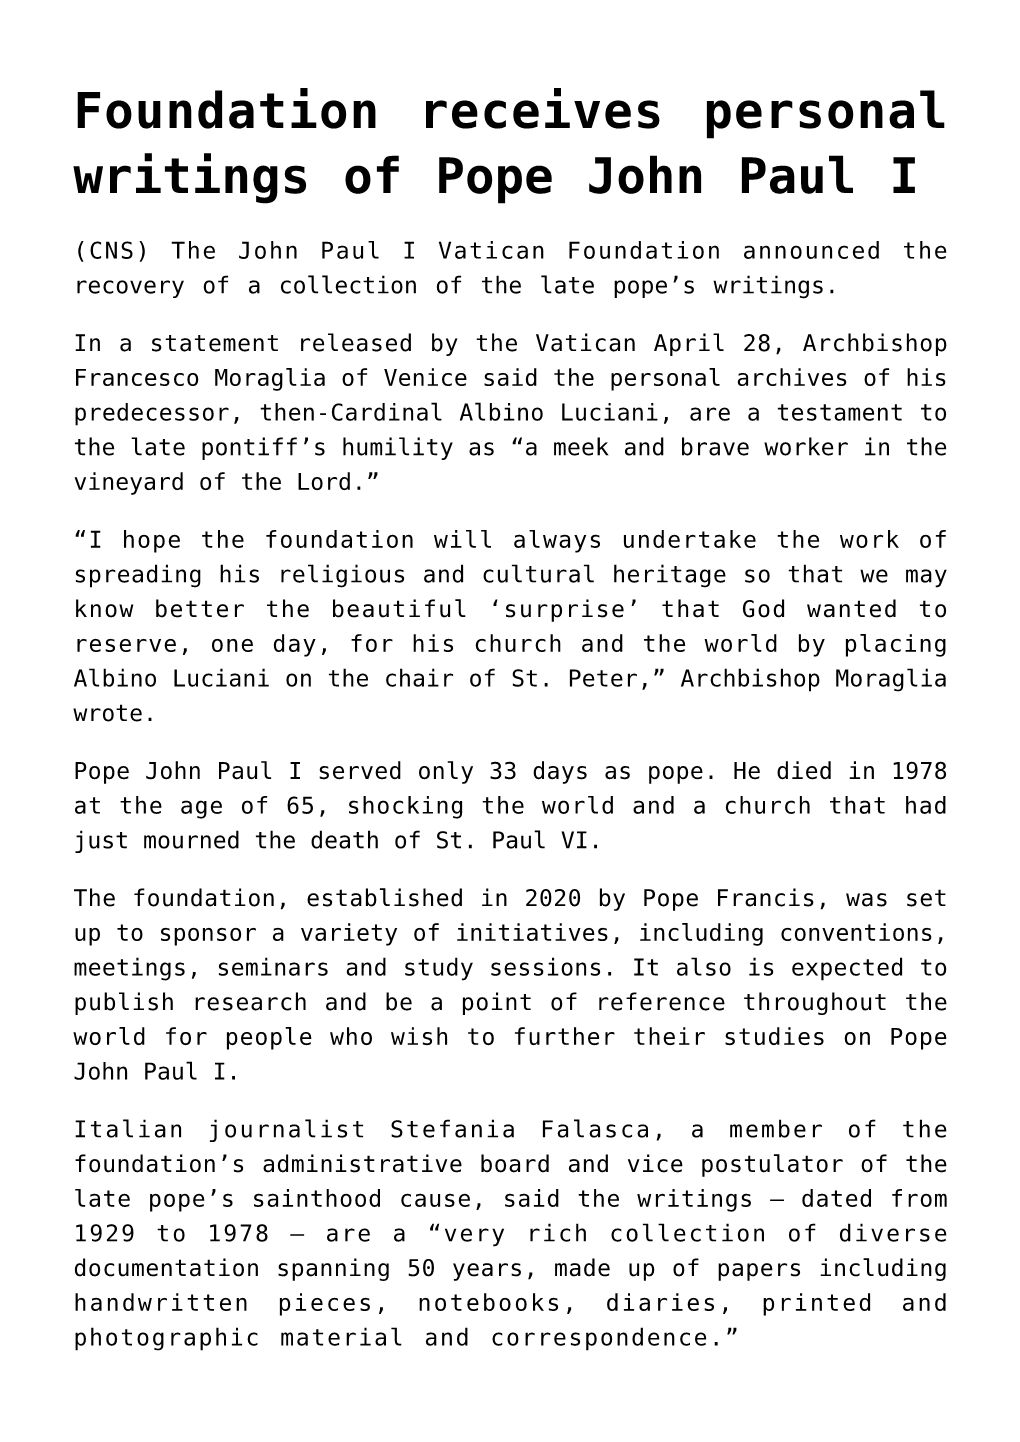 Foundation Receives Personal Writings of Pope John Paul I